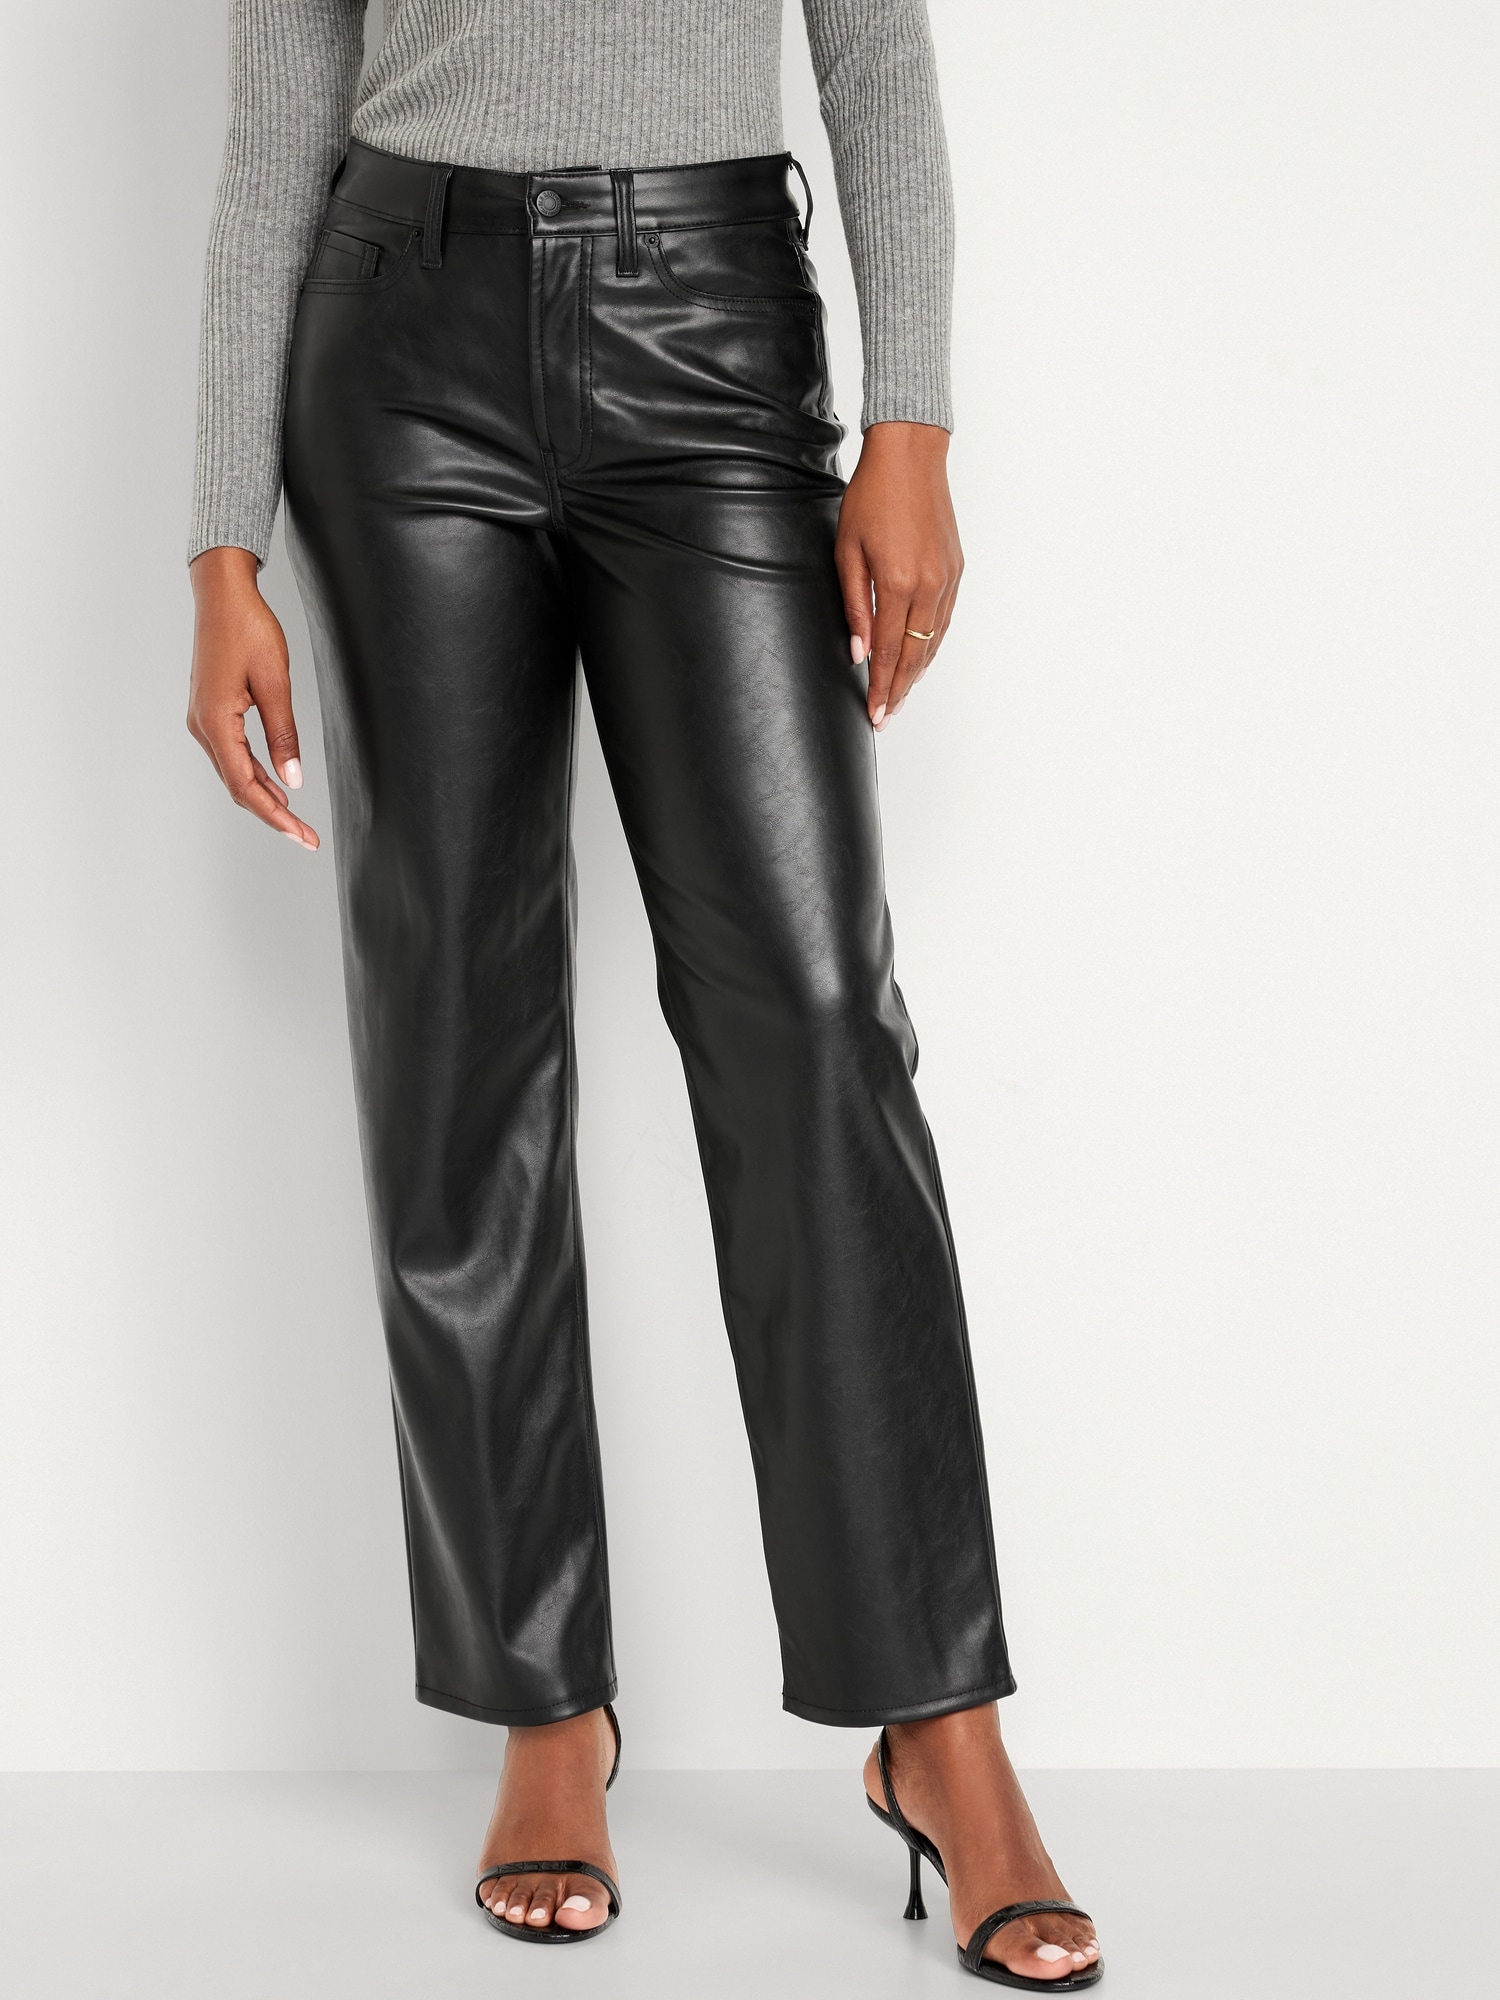 High-Waisted OG Loose Faux-Leather Pants for Women